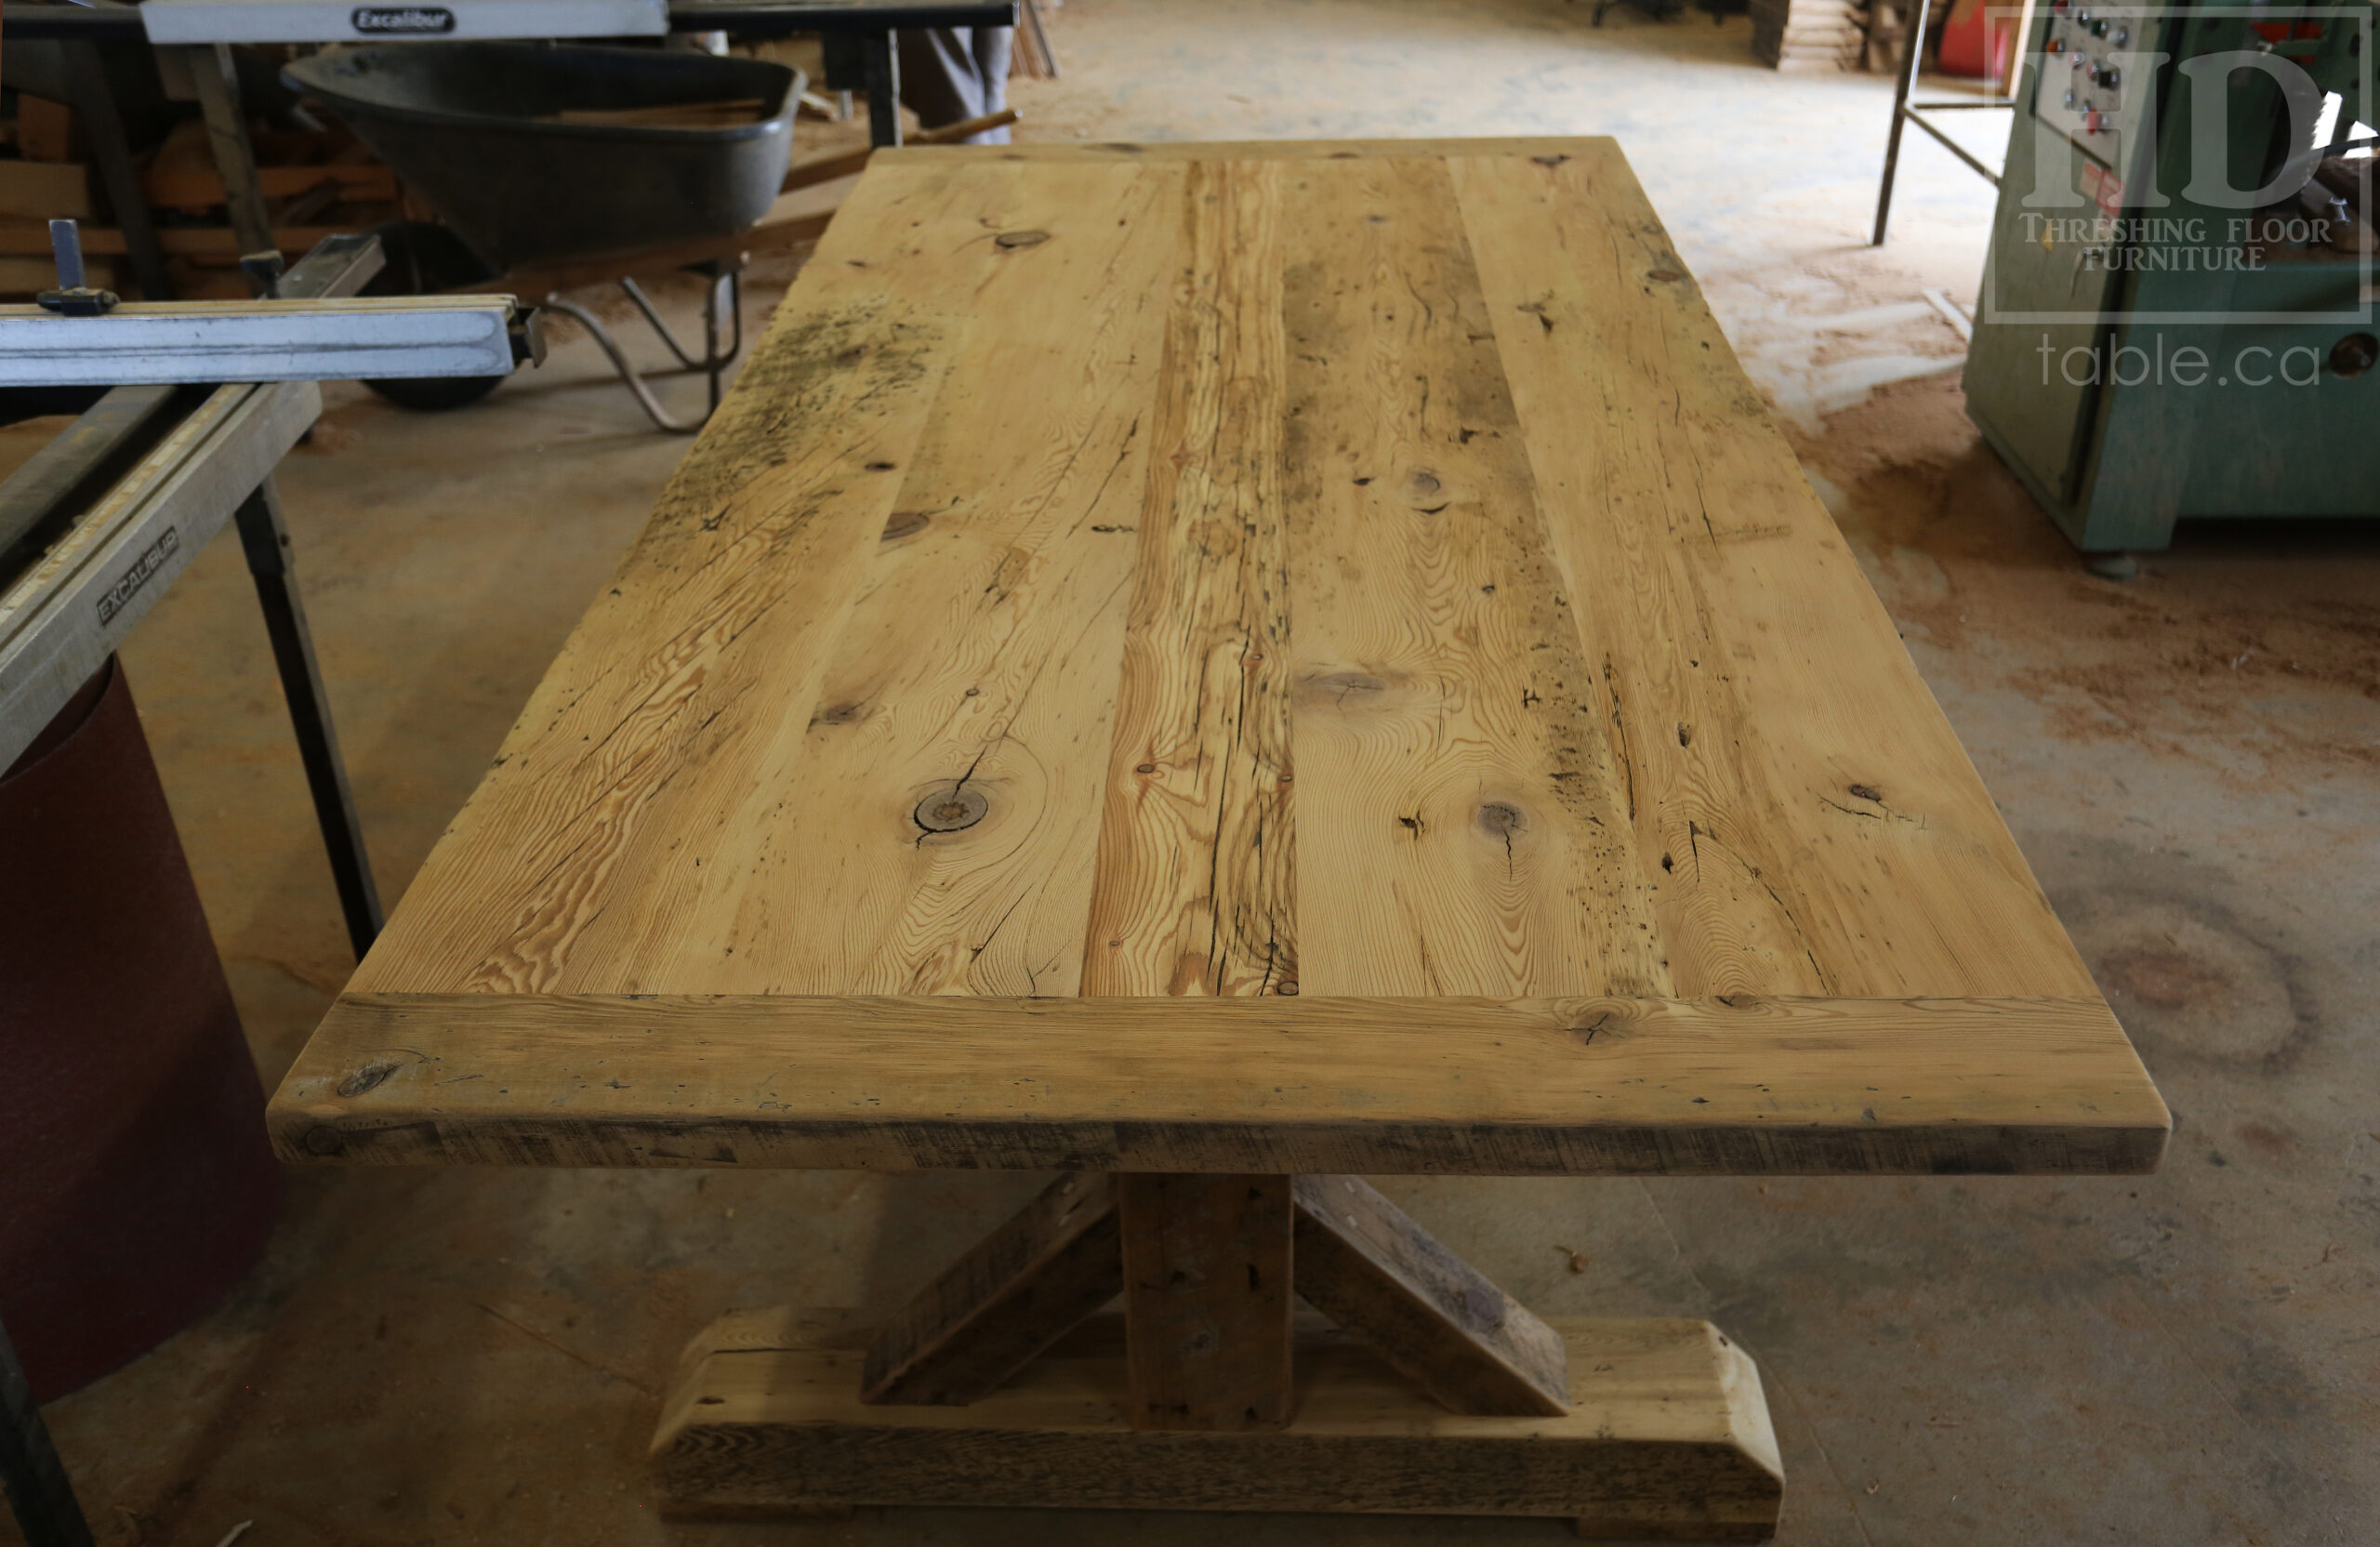 7.5’ Ontario Barnwood Table we made for a New Dundee, Ontario Home – 44” wide – Sawbuck Base [Beam Type Option] – Old Growth Reclaimed Hemlock Threshing Floor Construction – Original edges & distressing maintained -- Premium epoxy + satin polyurethane finish – www.table.ca